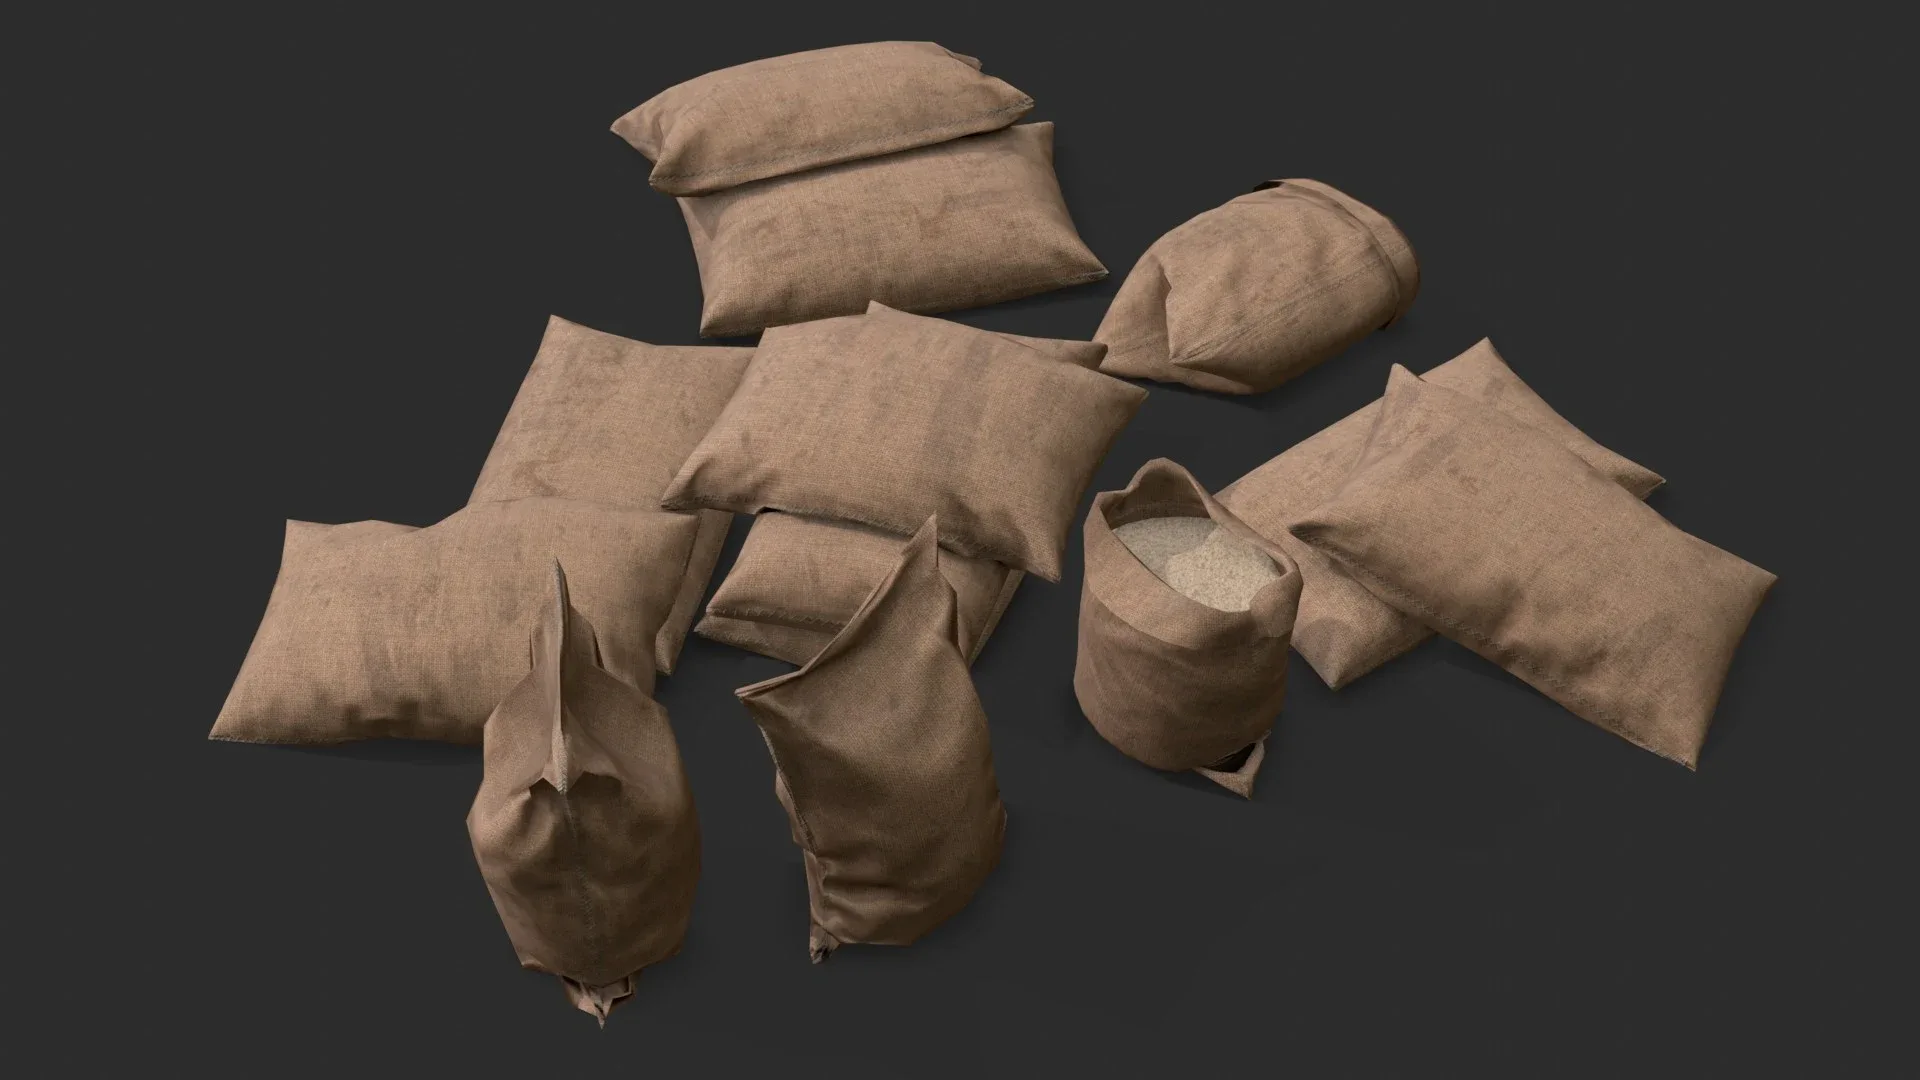 Generic Bags Assets